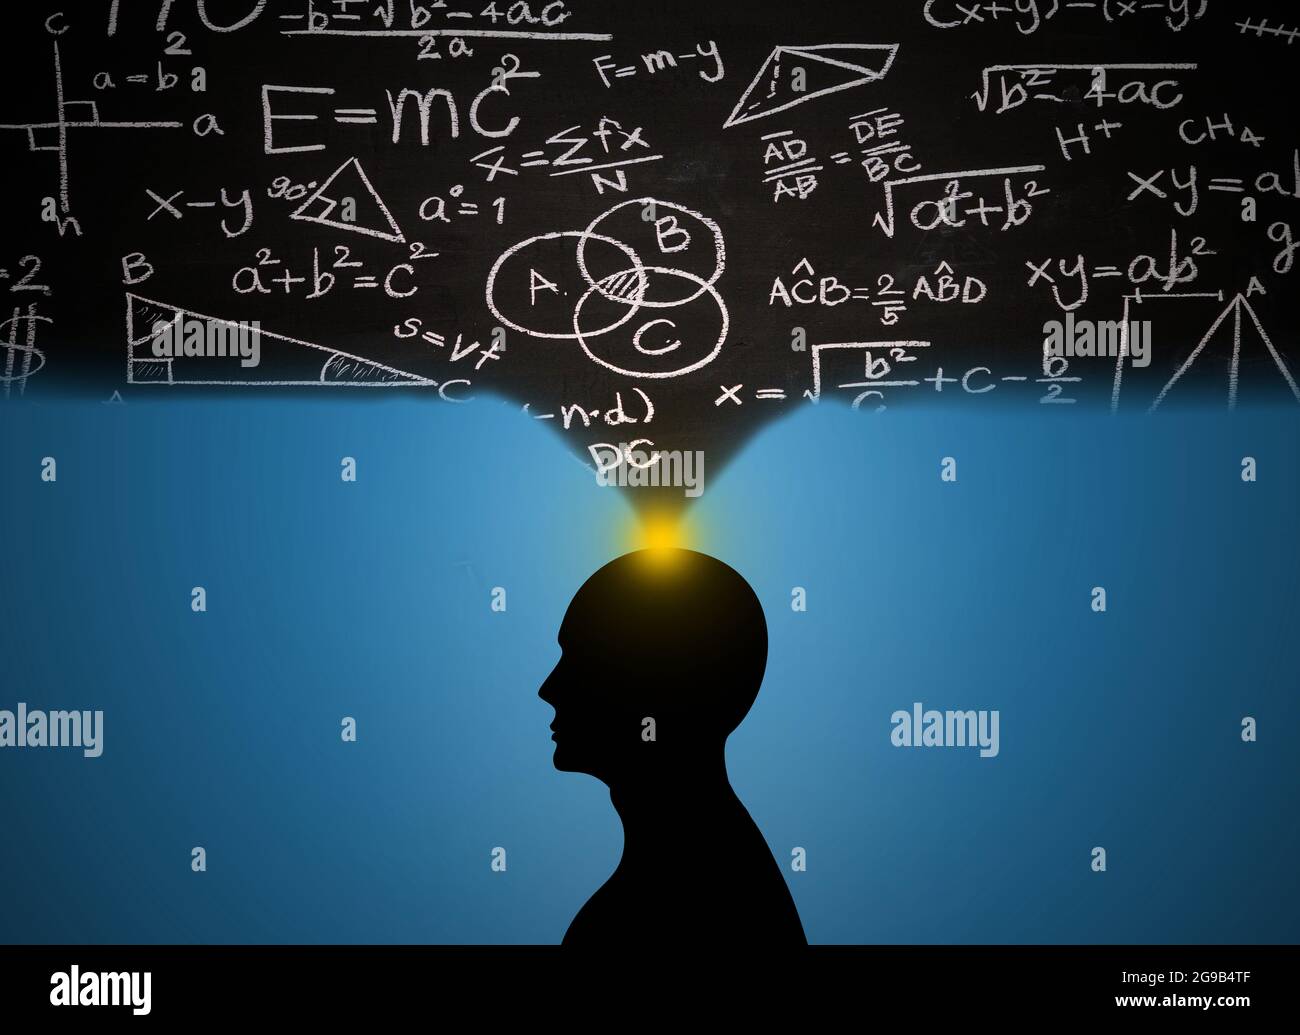 Man Head With moths and physics Thoughts. man Silhouette Brain With mathematics and physic Formula Cloud . scientific brainstorming person and Science Stock Photo